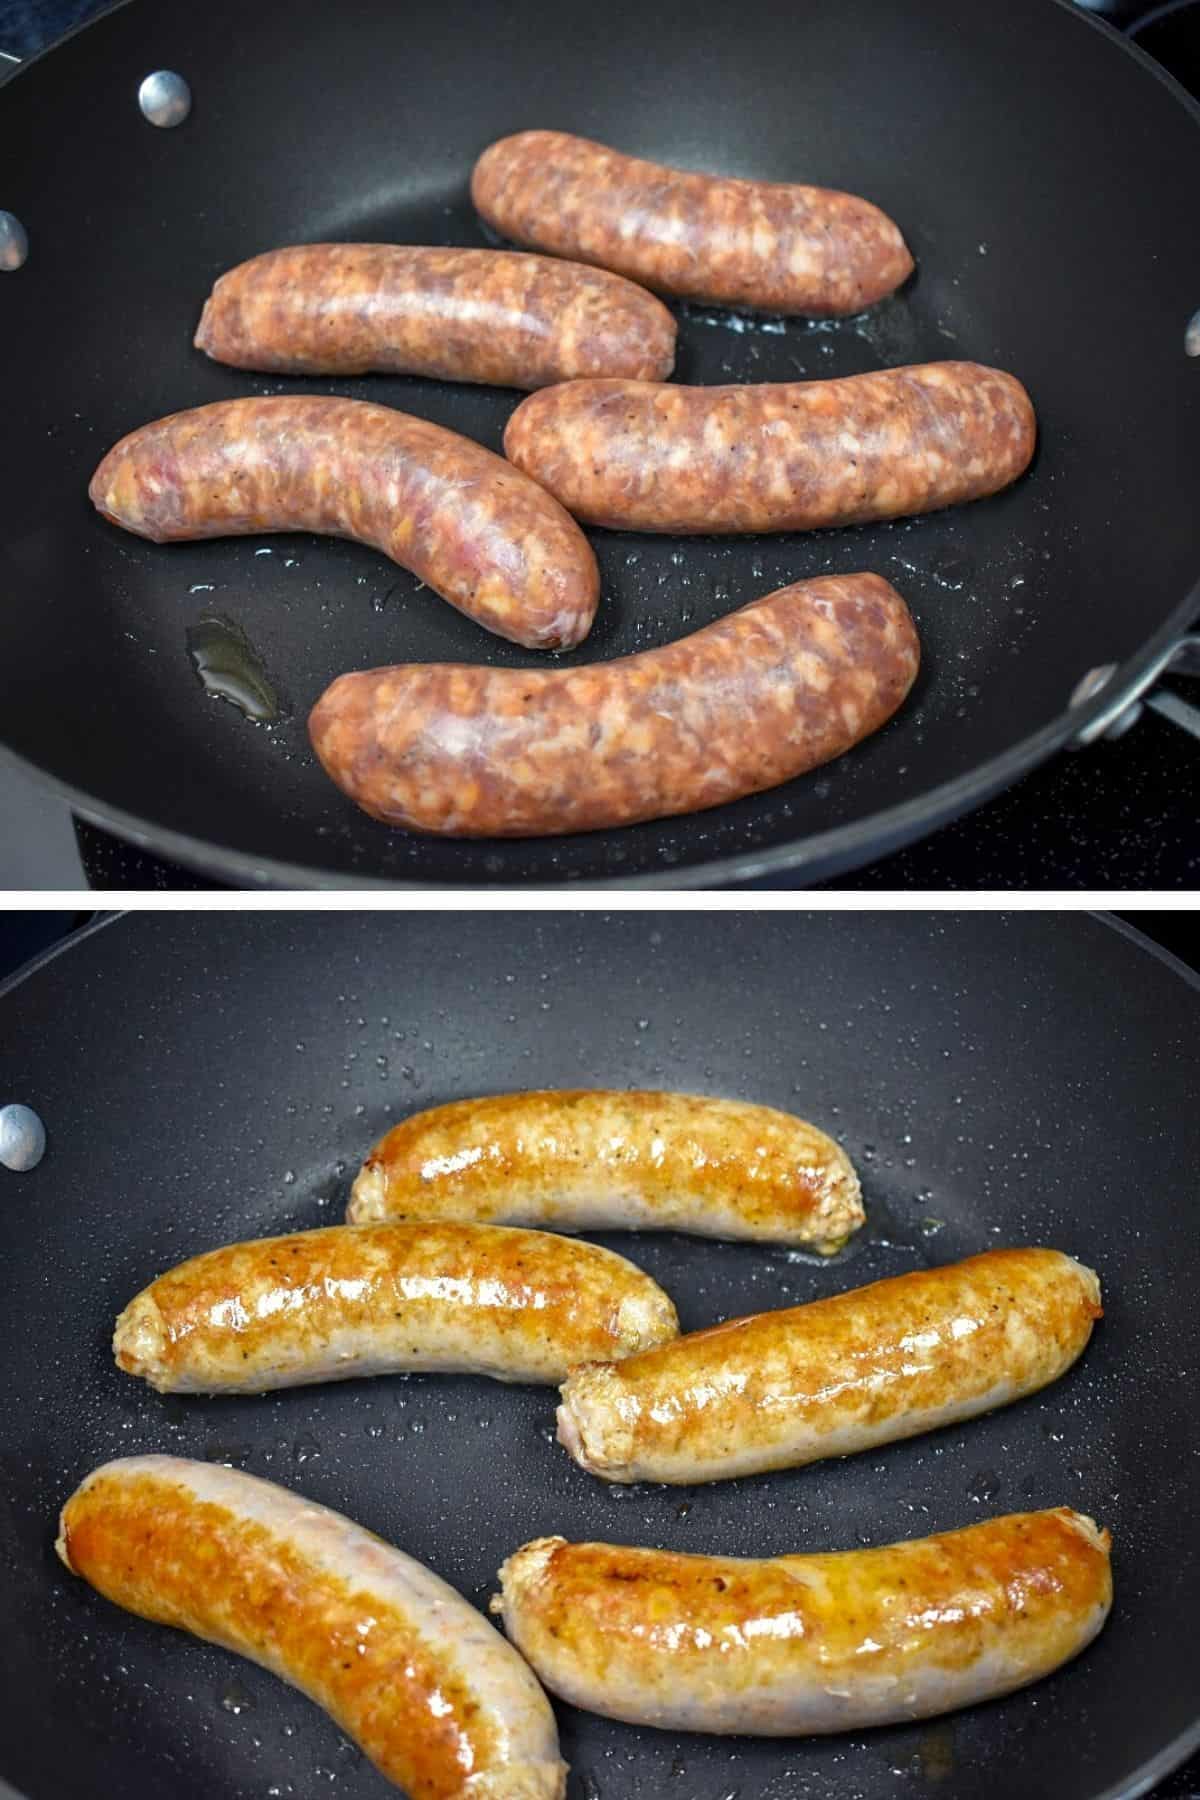 Two images of Italian sausage cooking in a large, black skillet. The top image they are just put in and the bottom image they are browned.